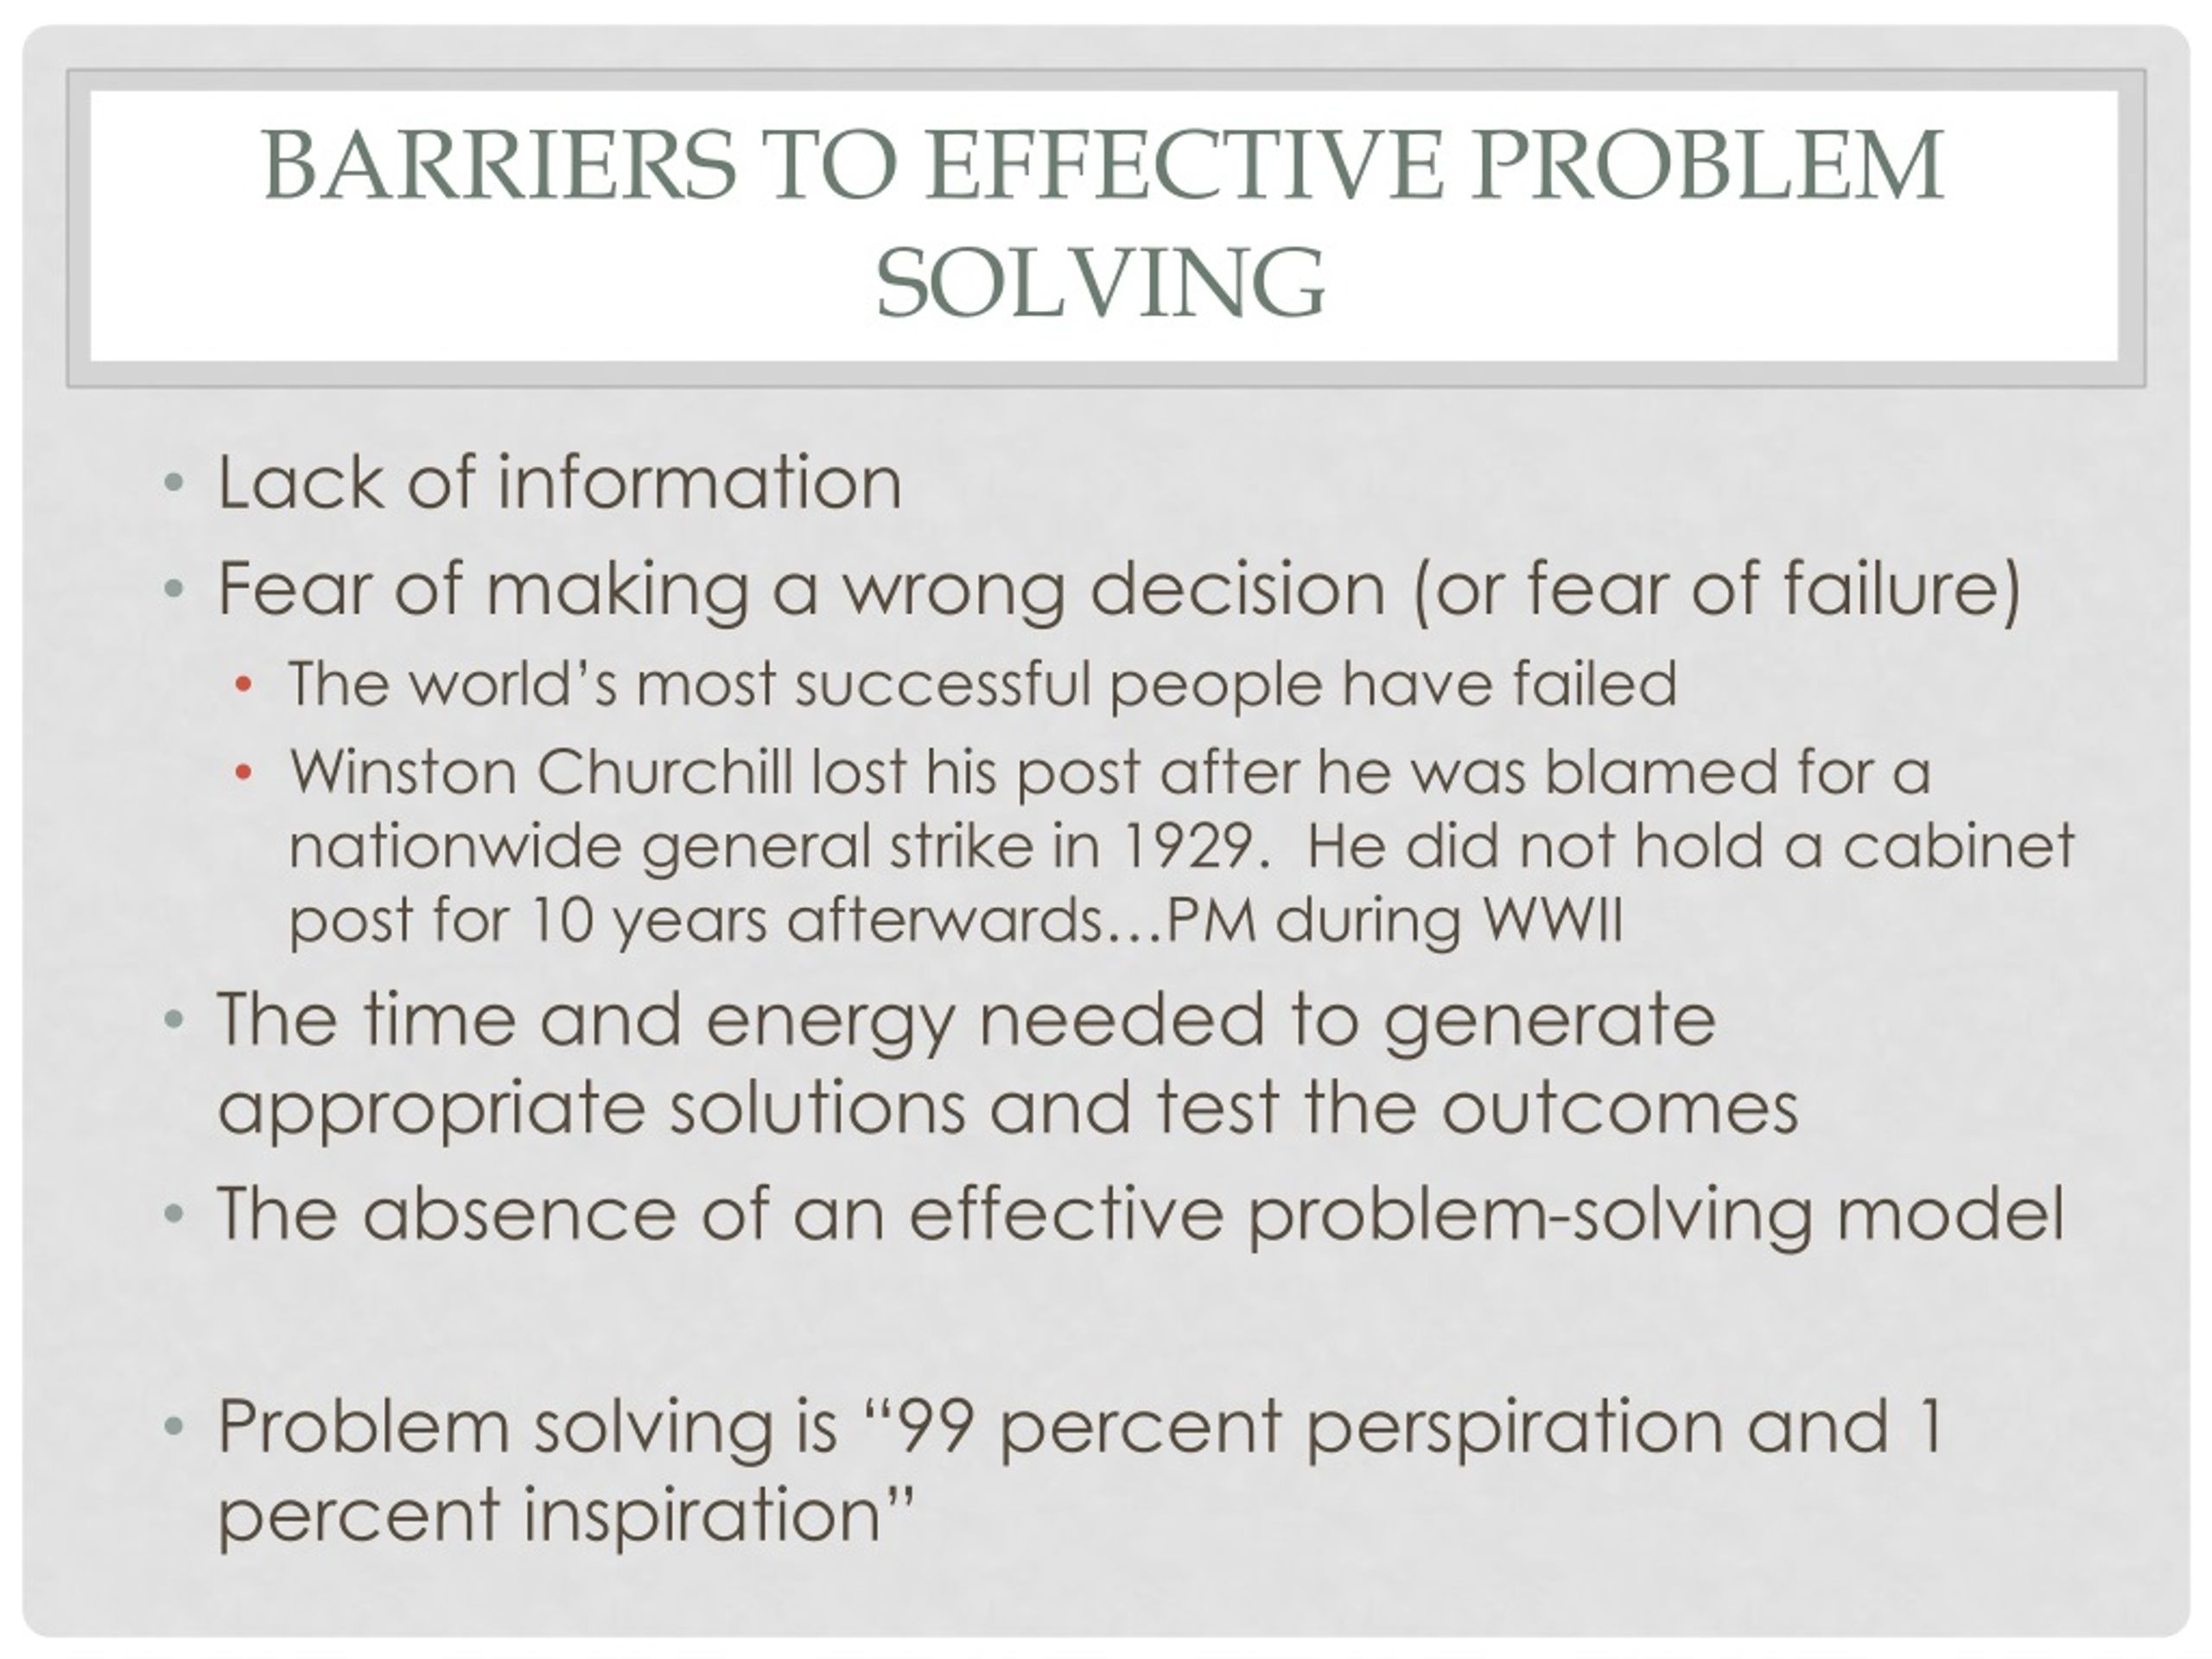 analyze different barriers to problem solving and evaluate their influence